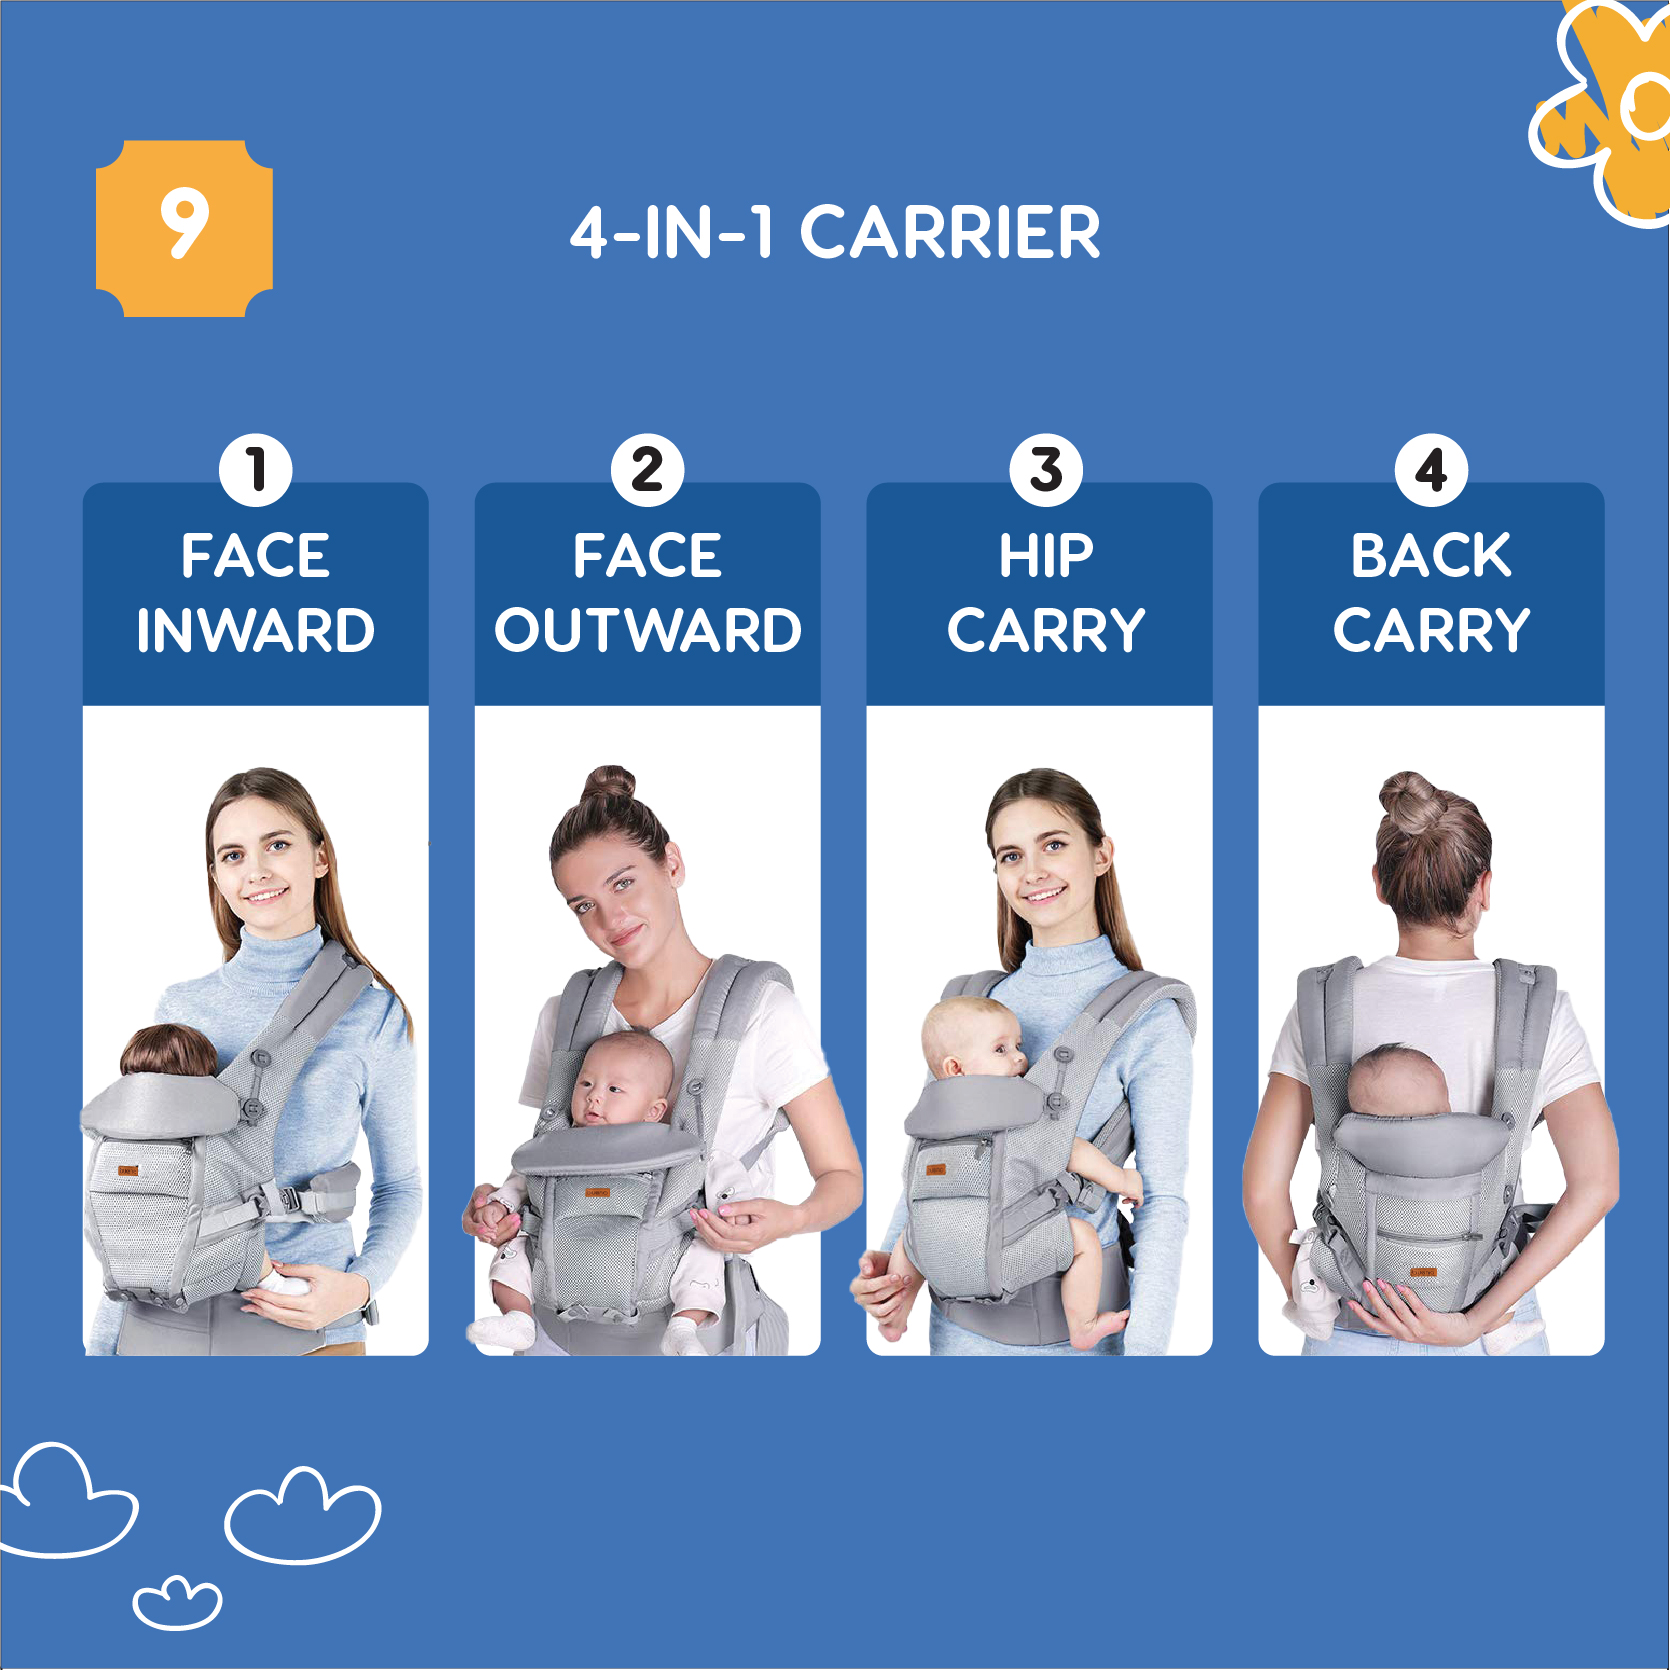 Bueno All in One 360 Ergonomic New Born Baby Shoulder Carrier